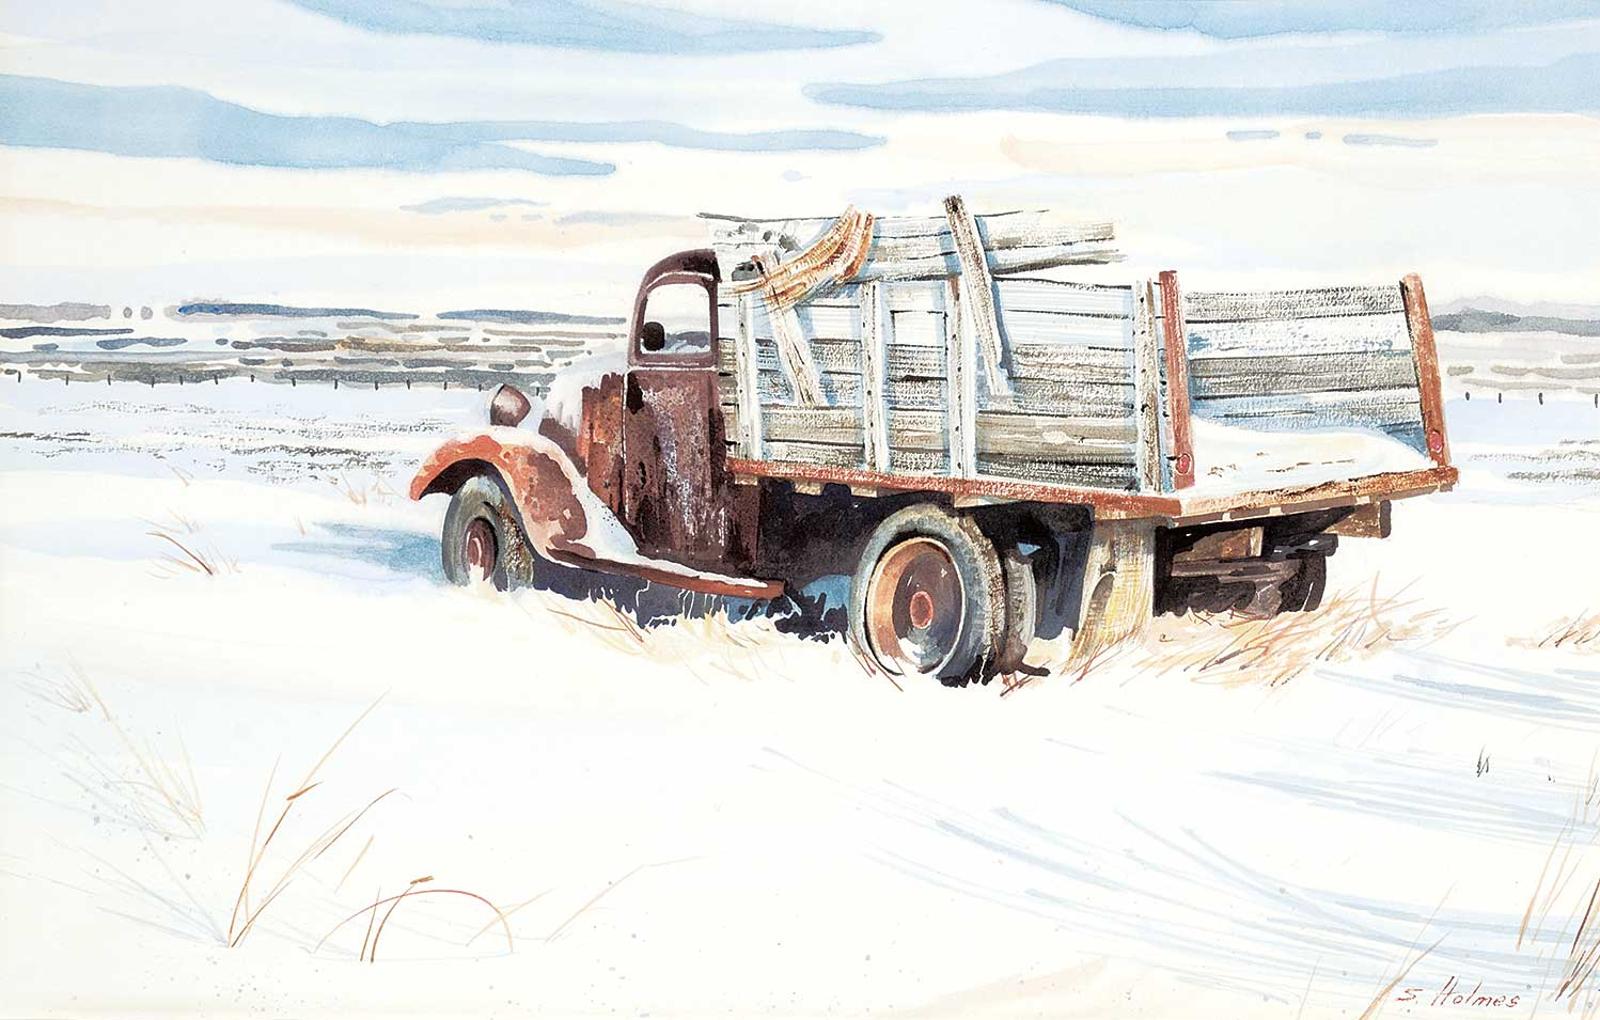 Sharon Christian Holmes - Untitled - Old Truck